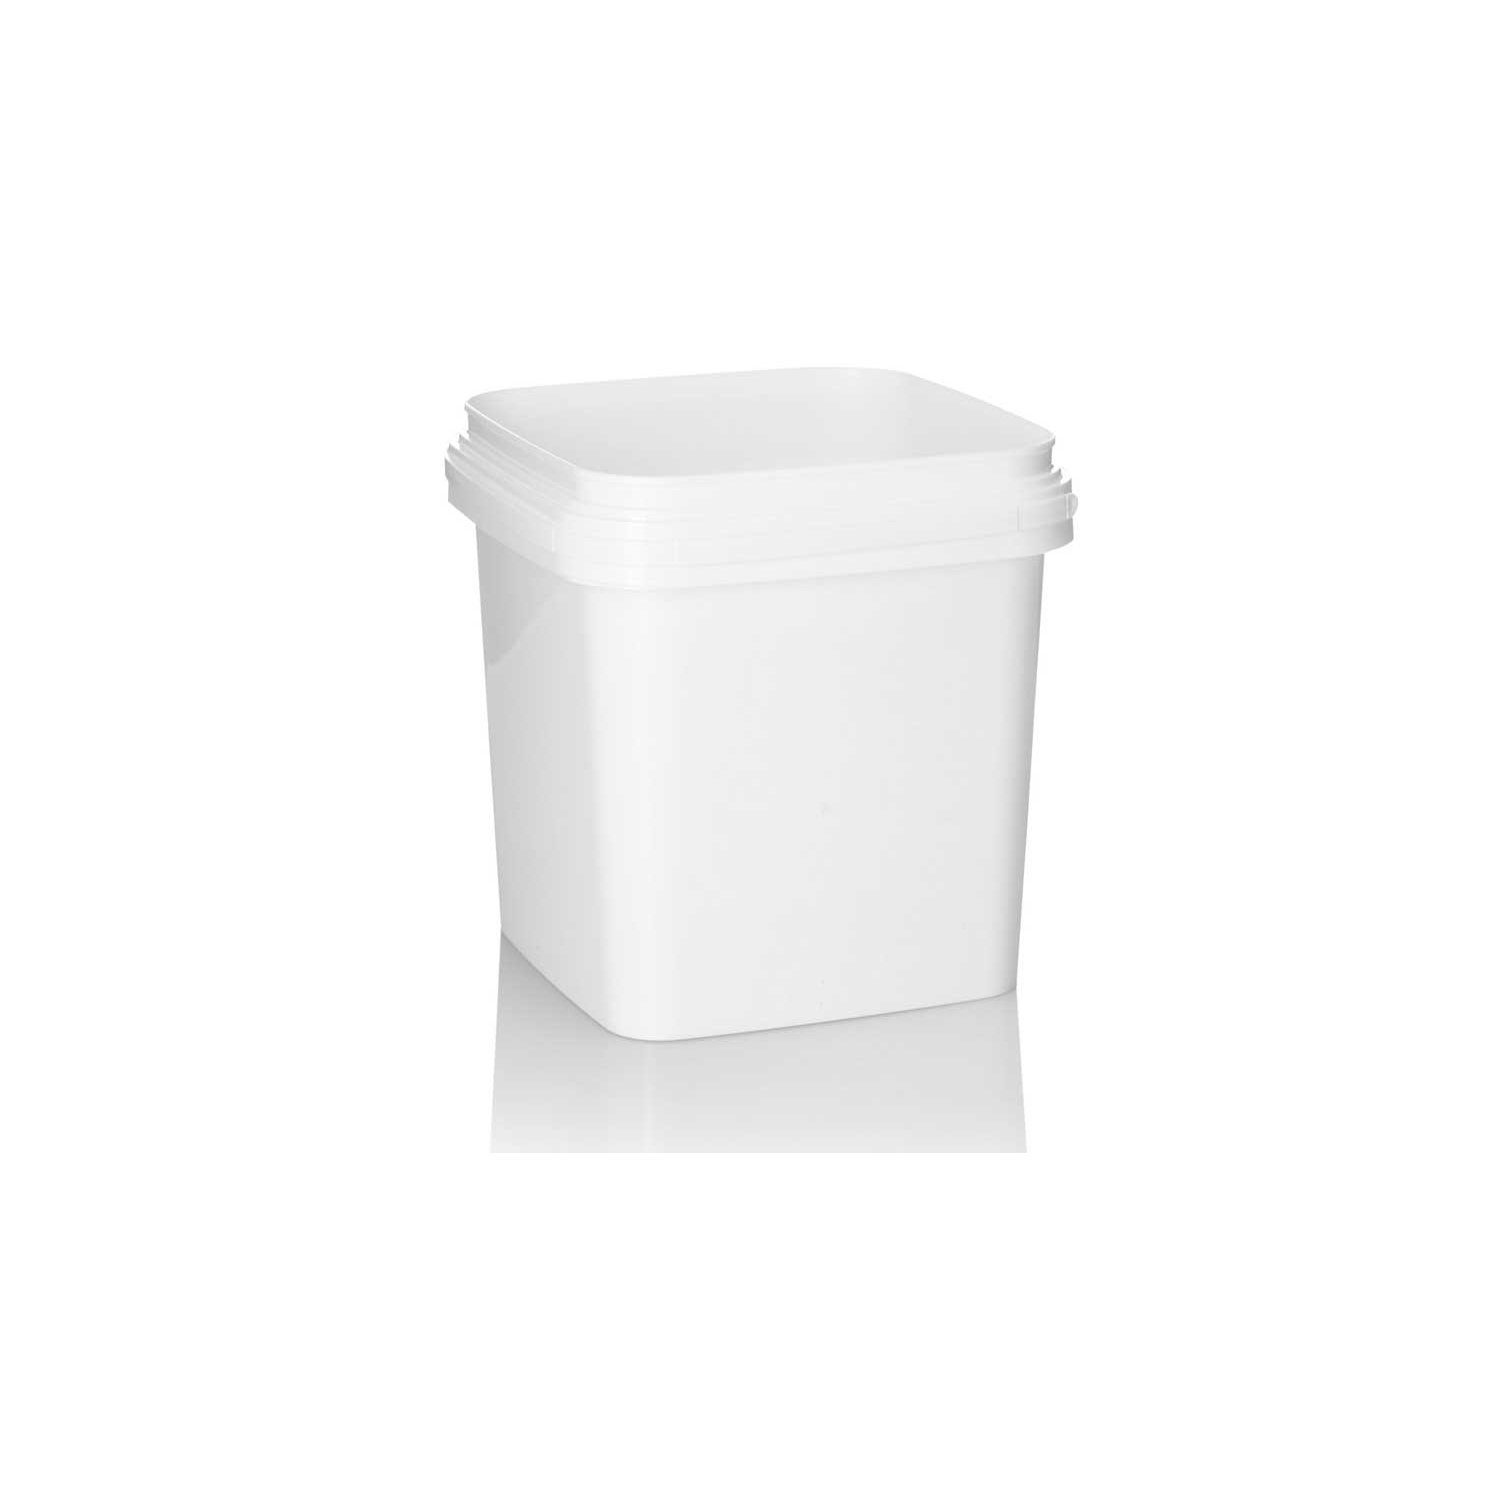 2.5ltr White PP Tamper Evident Square Pail with Plastic Handle